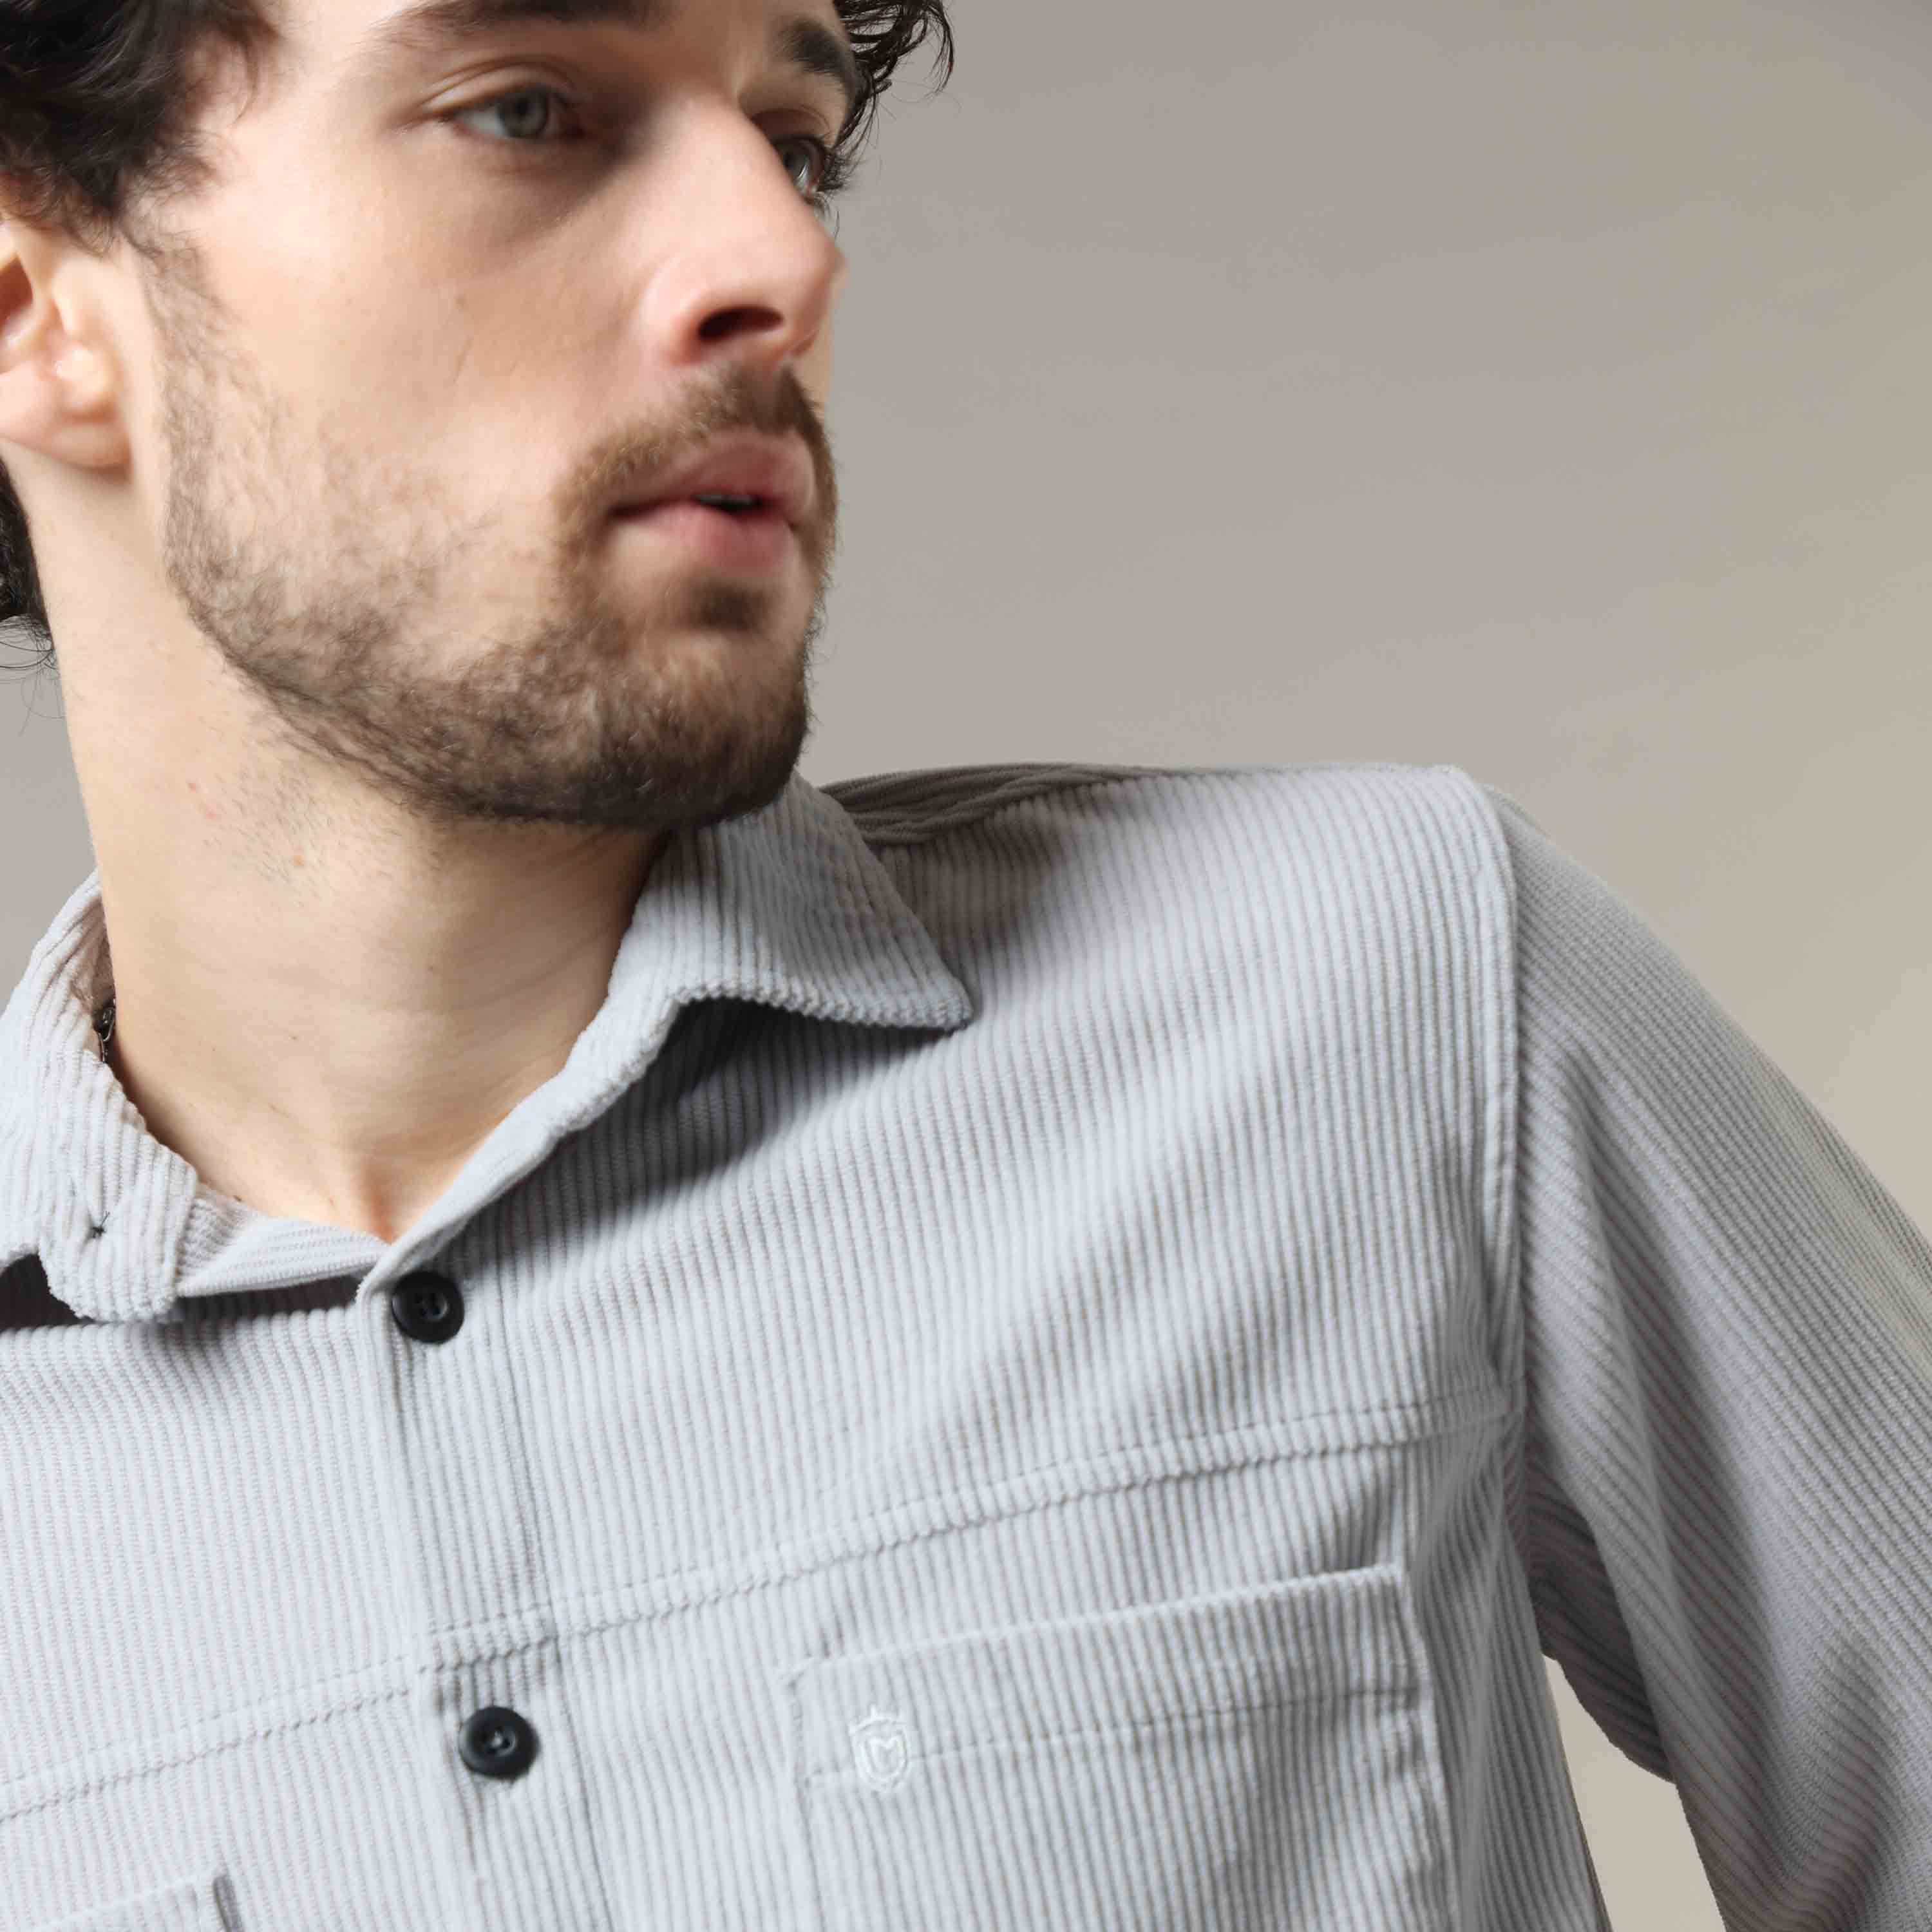 Buy Latest Grey Corduroy Fabric Shirt at Great PriceRs. 1499.00